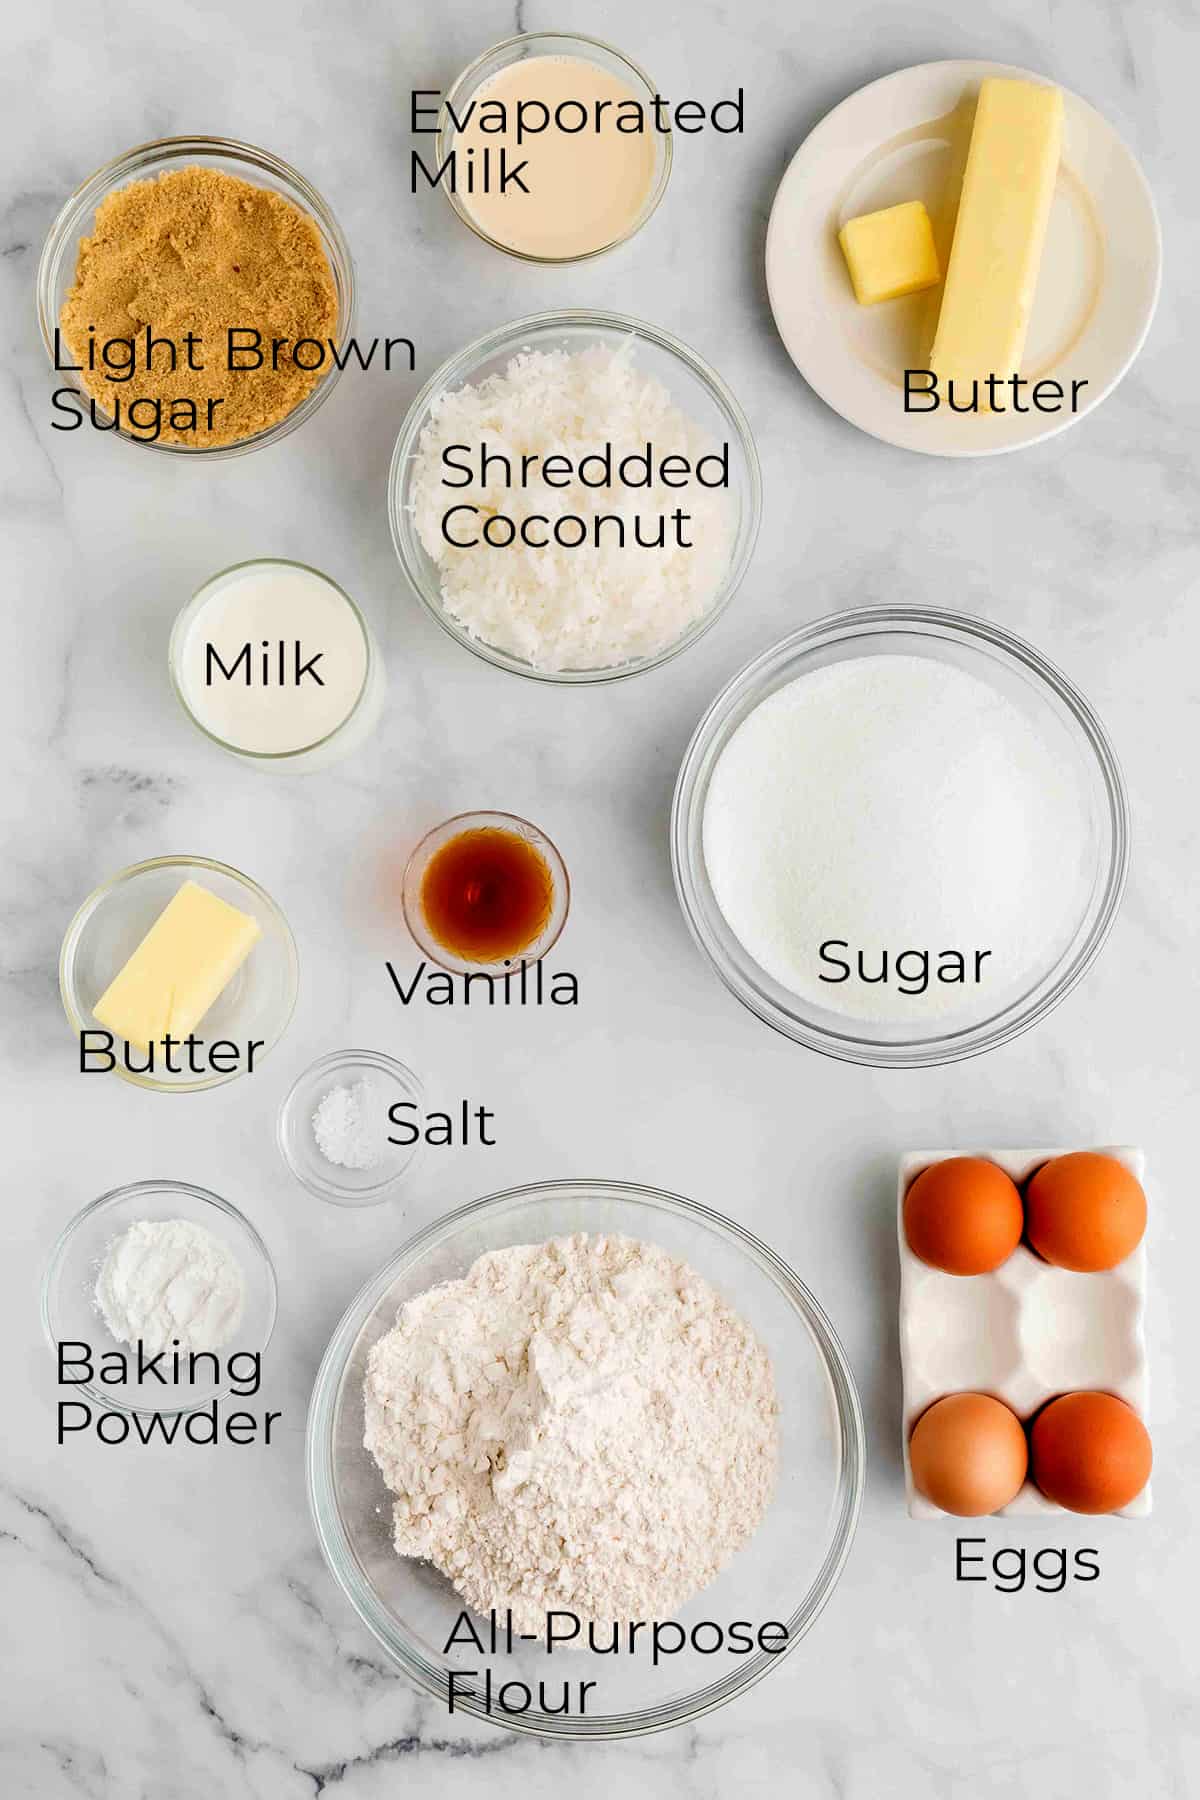 All ingredients needed to make lazy daisy cake.